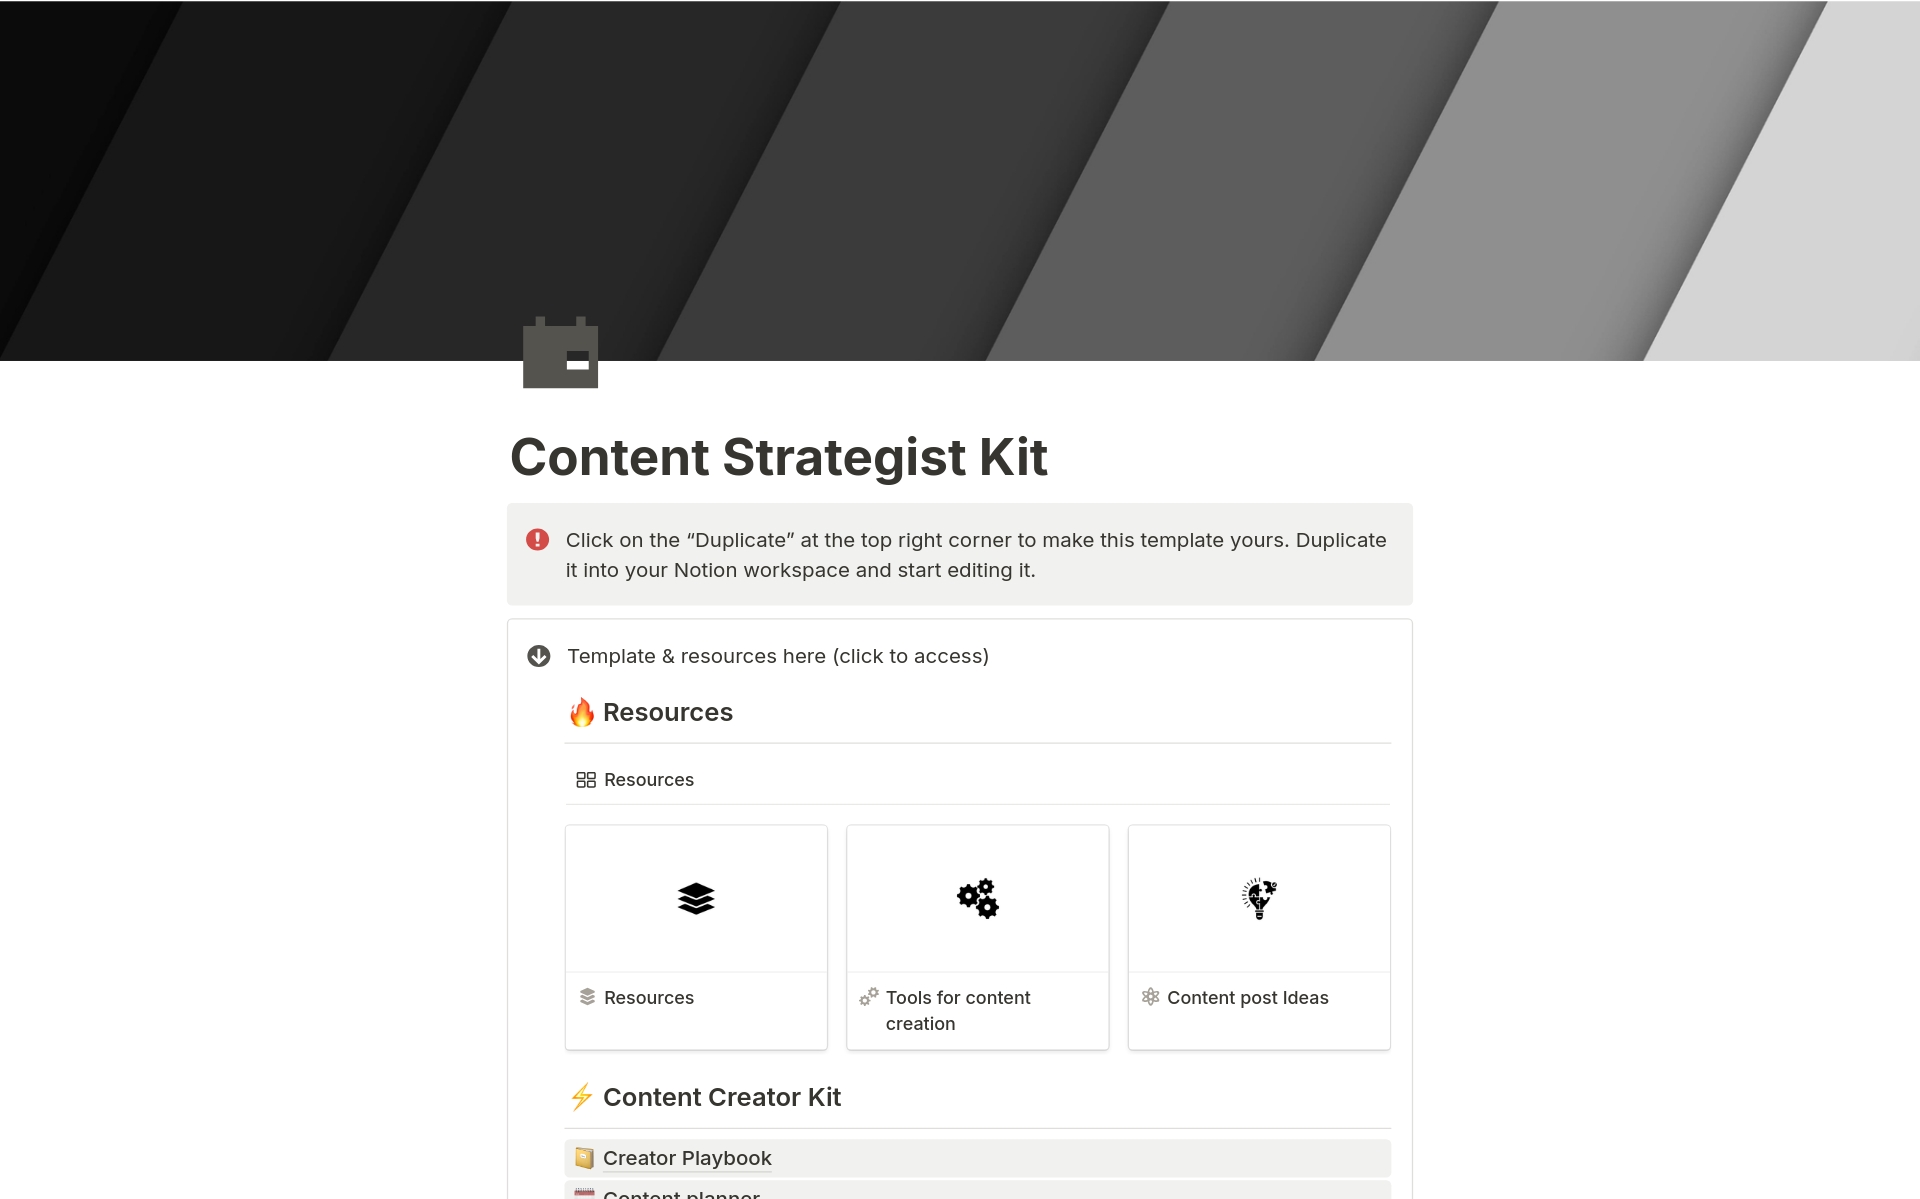 All in one tool kit to help you become a successful content creator